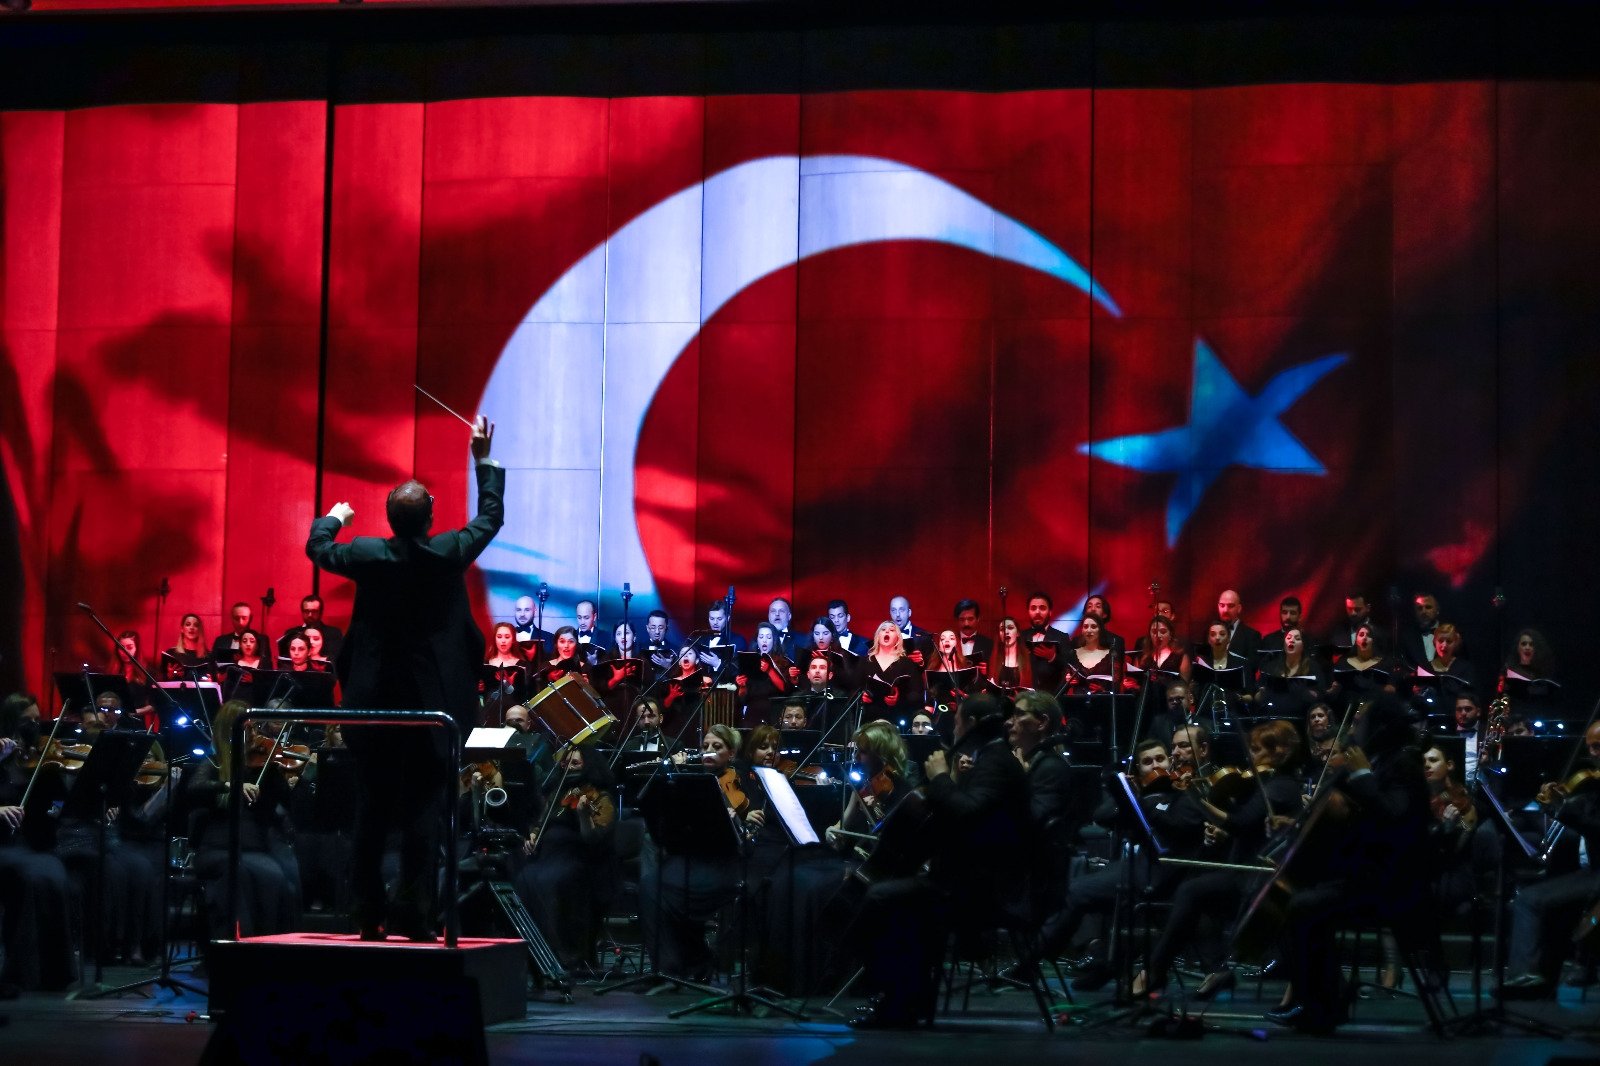 A view from the performance of the Istanbul State Symphony Orchestra at the gala night of Türk Telekom Opera Hall in AKM, Istanbul, Turkey, May 18, 2022. (Courtesy of Türk Telekom)